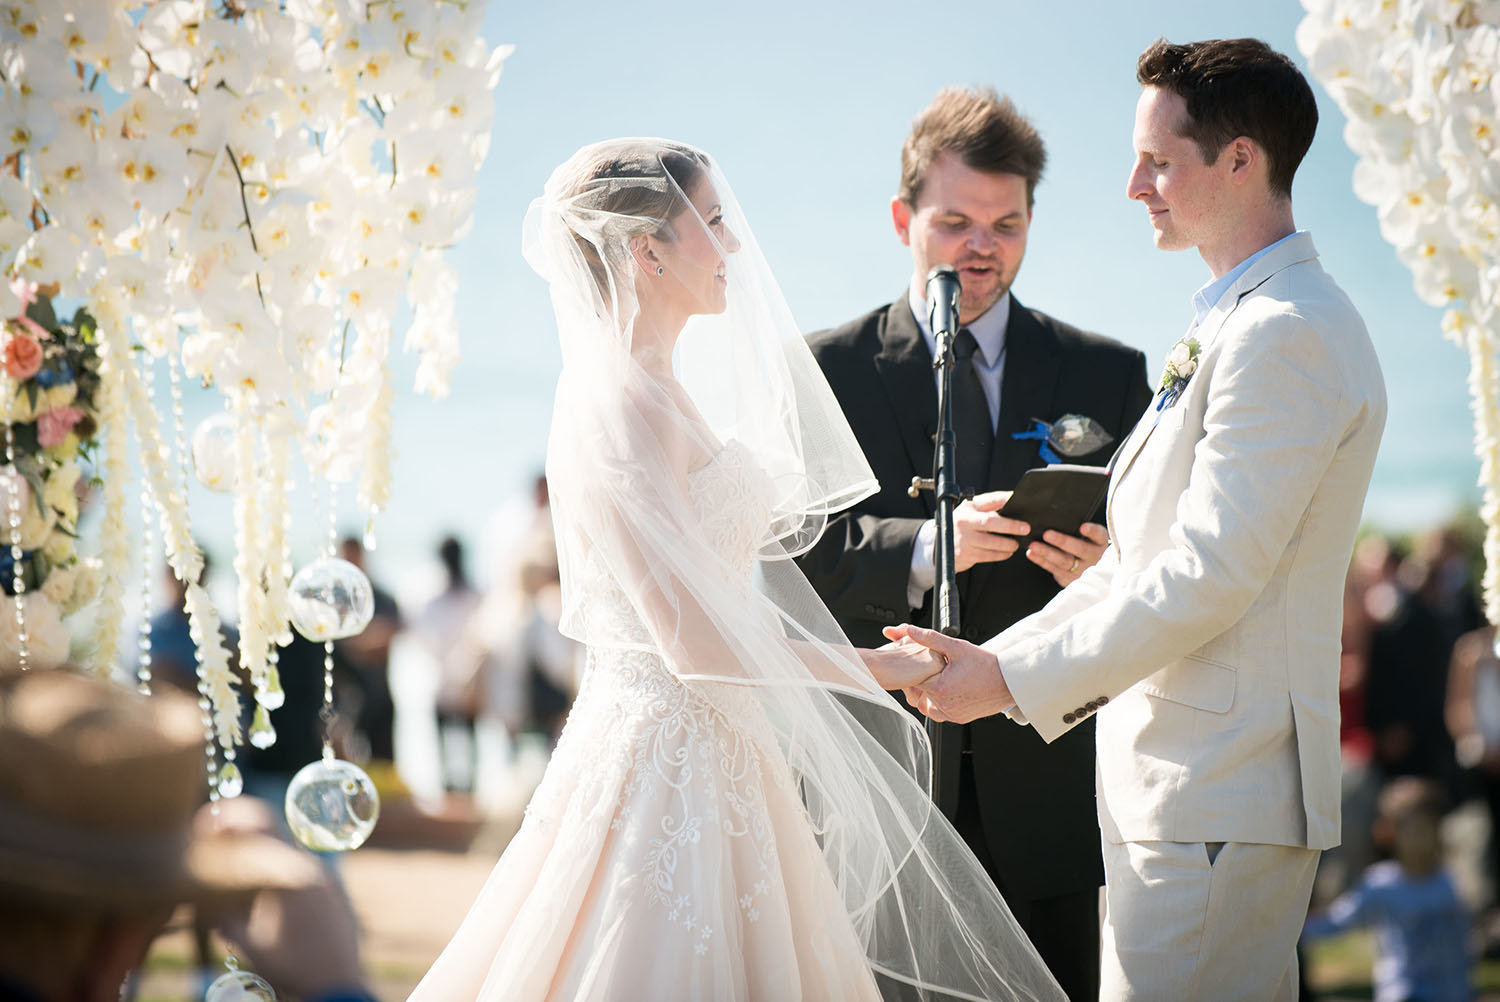 Wedding ceremony with blue skies at Seagrove Park